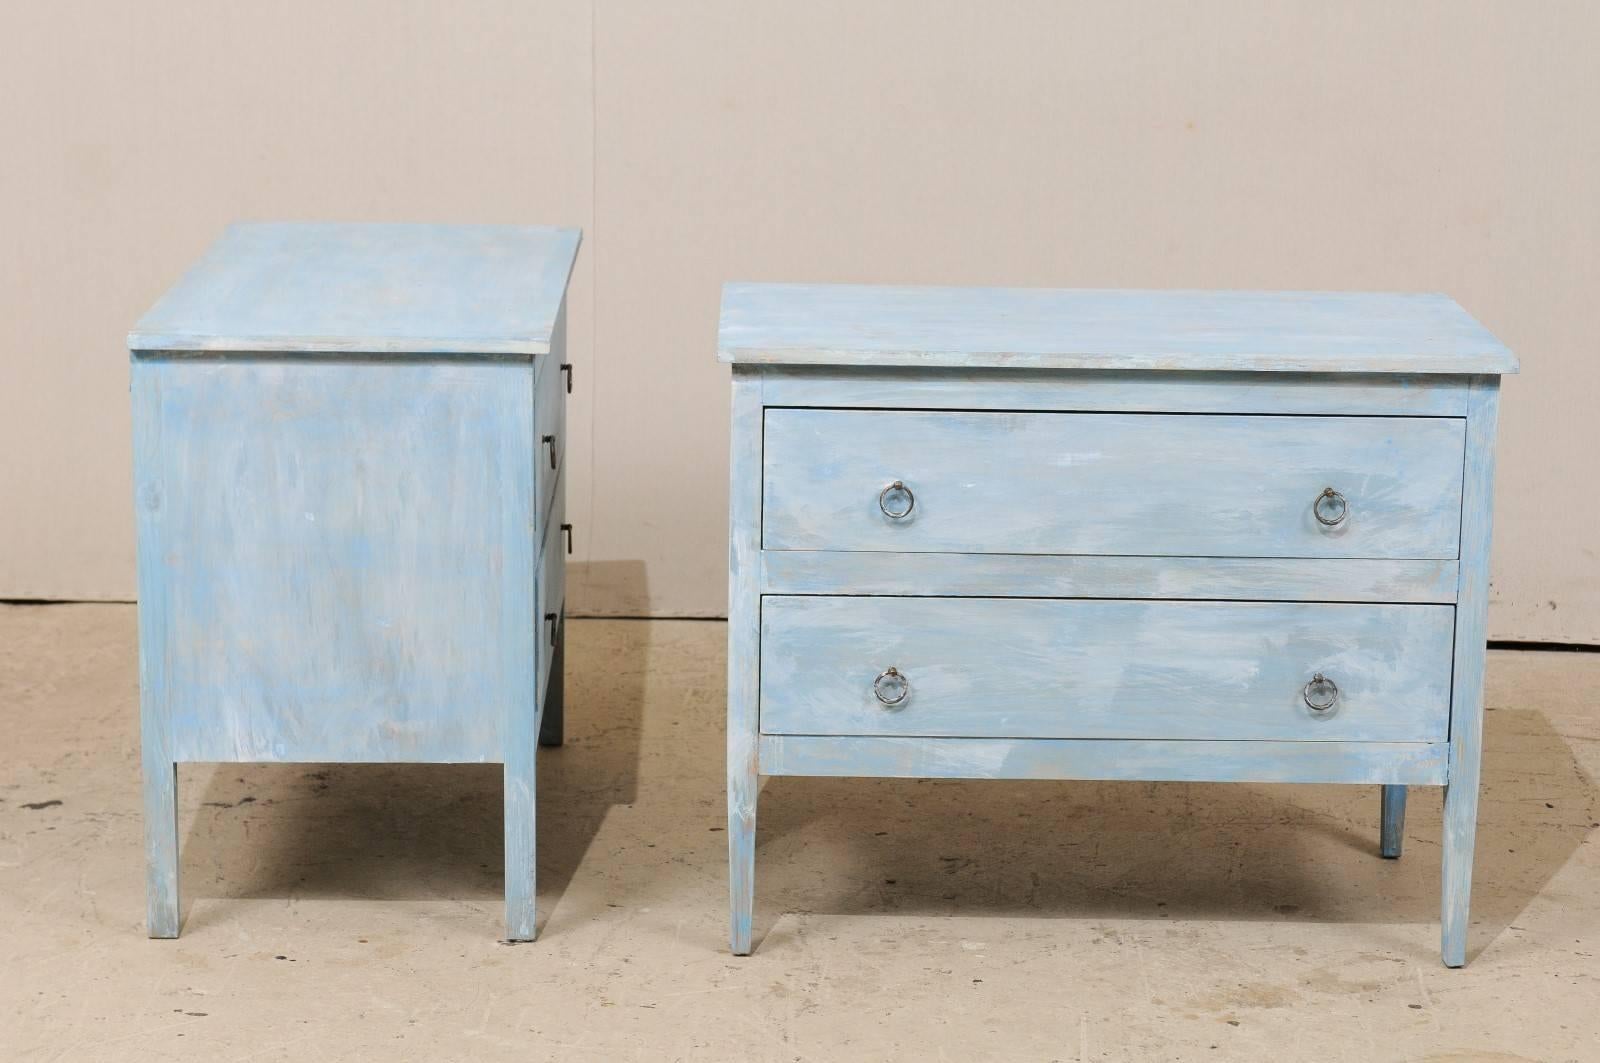 20th Century Pair of Painted Wood Two-Drawer Chests in Grey, Light Blue and White Color